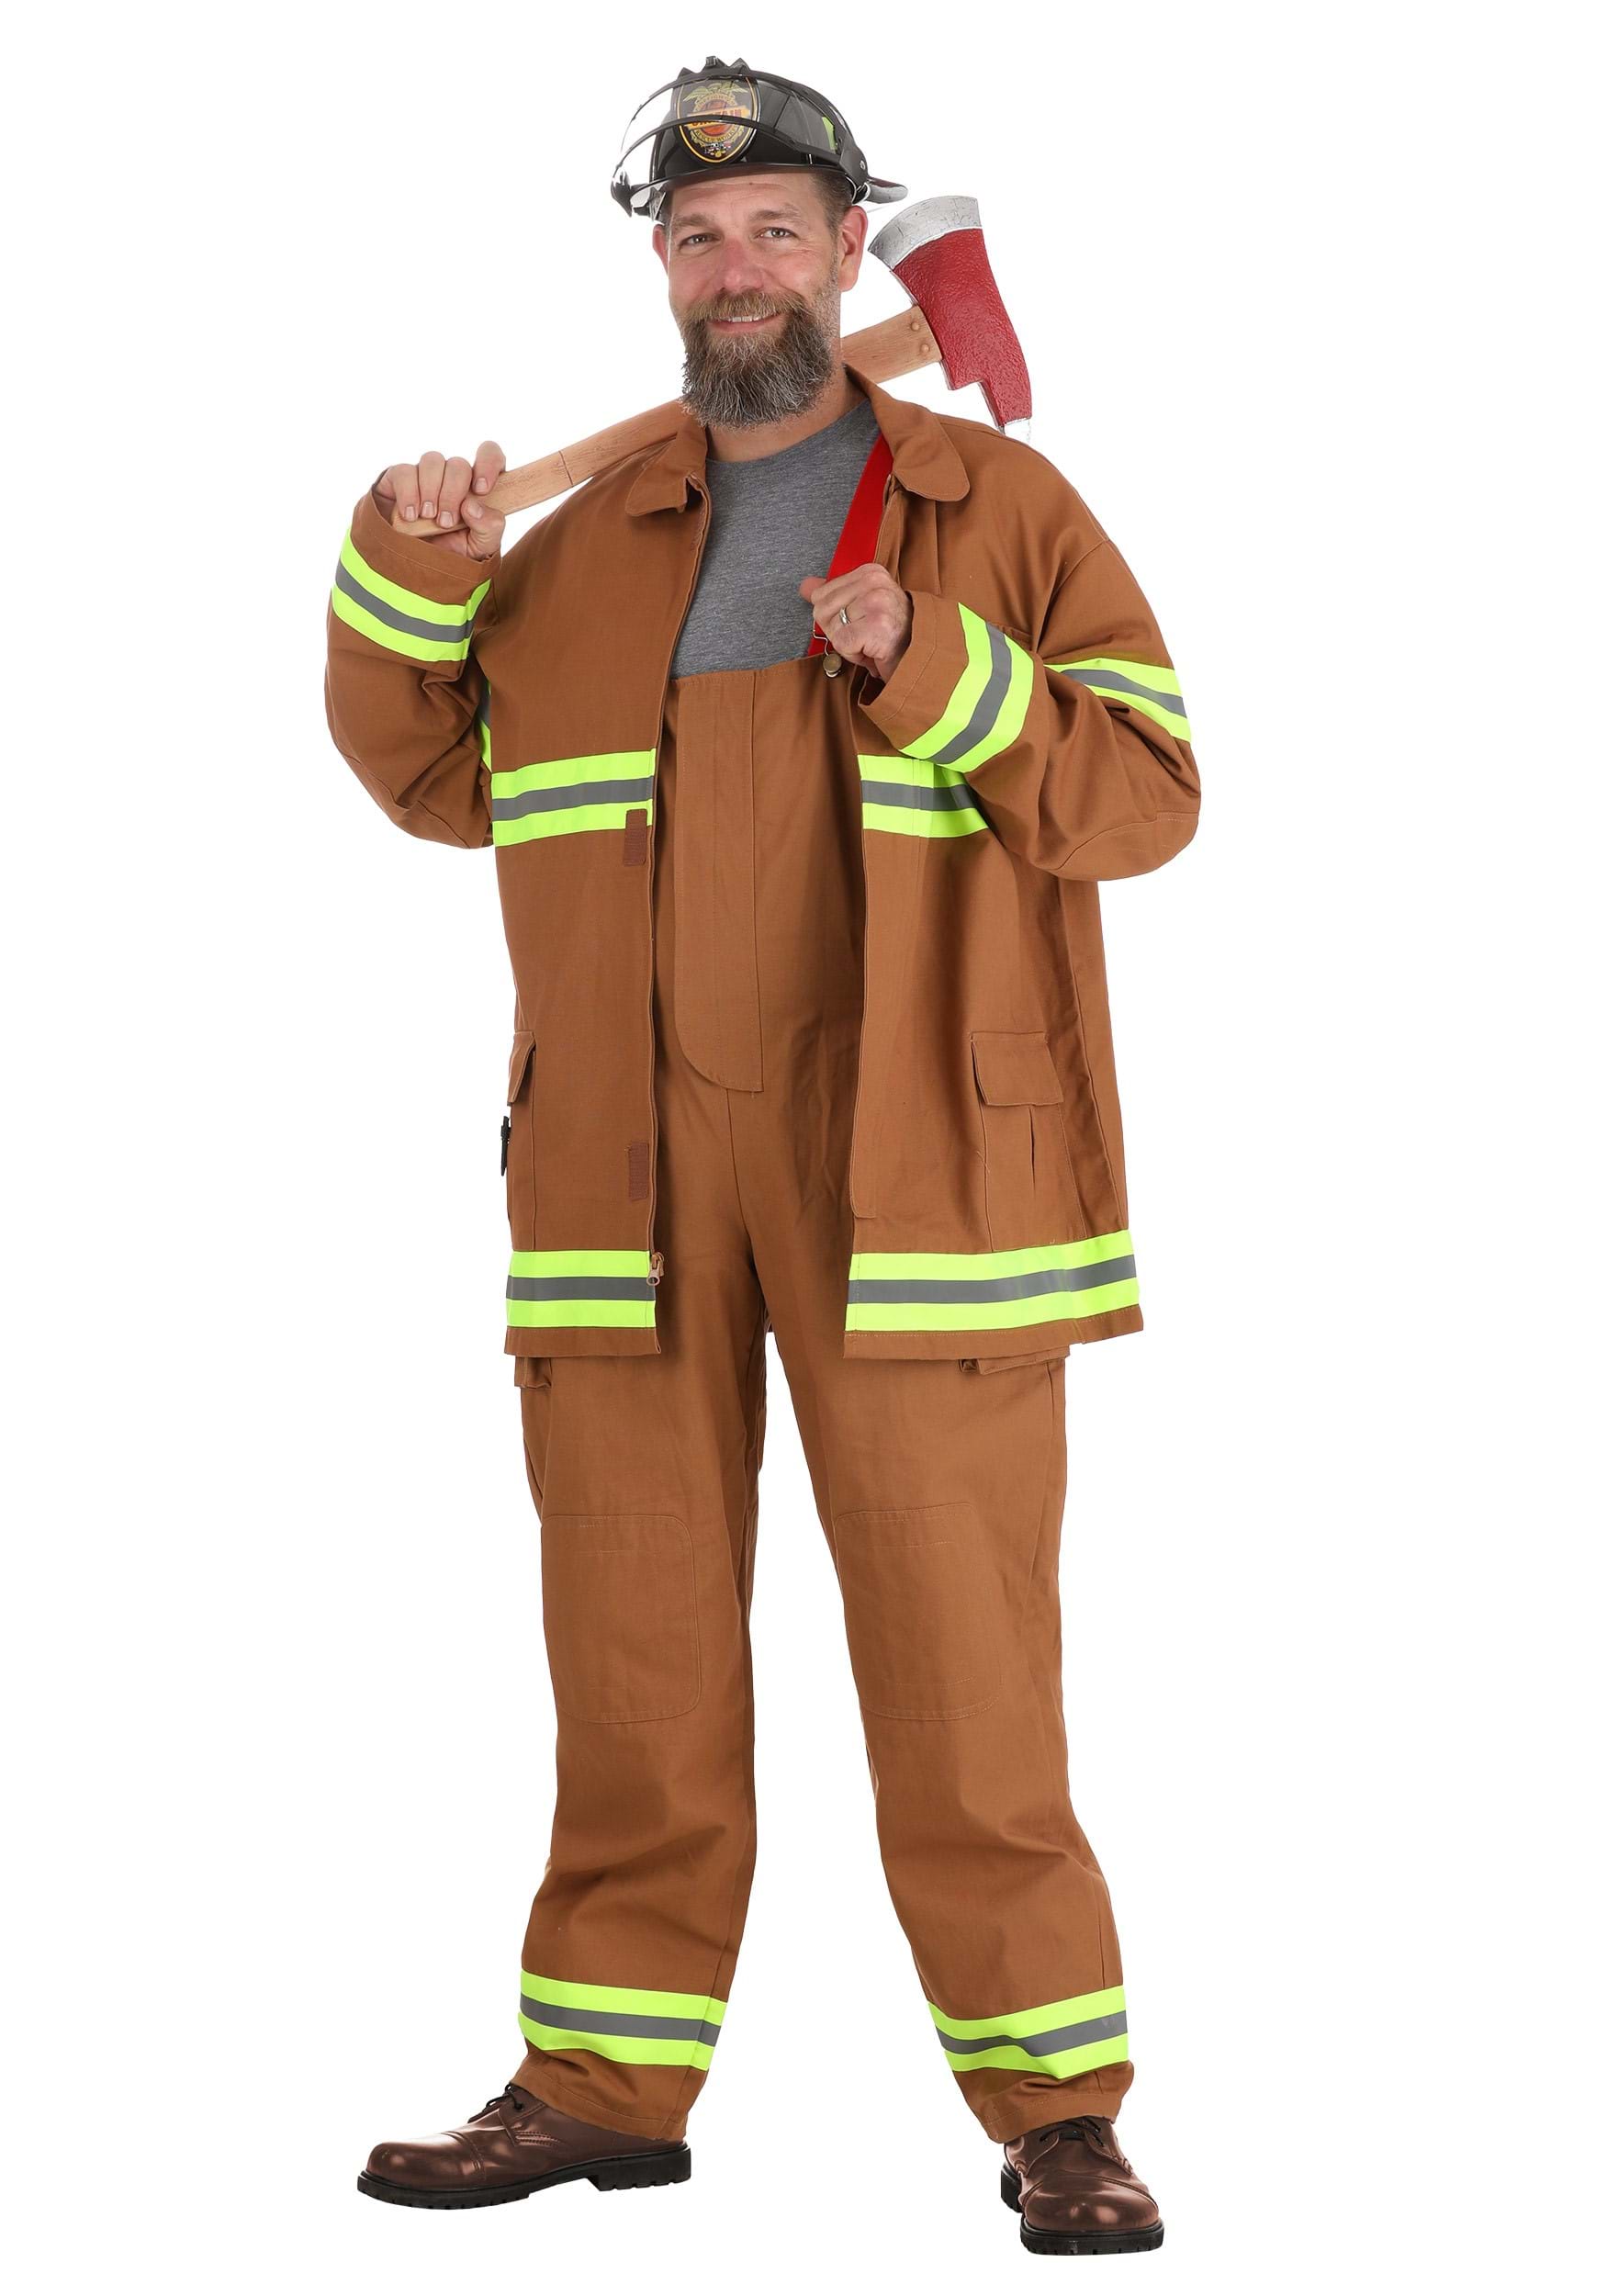 Firefighter Adult Costume